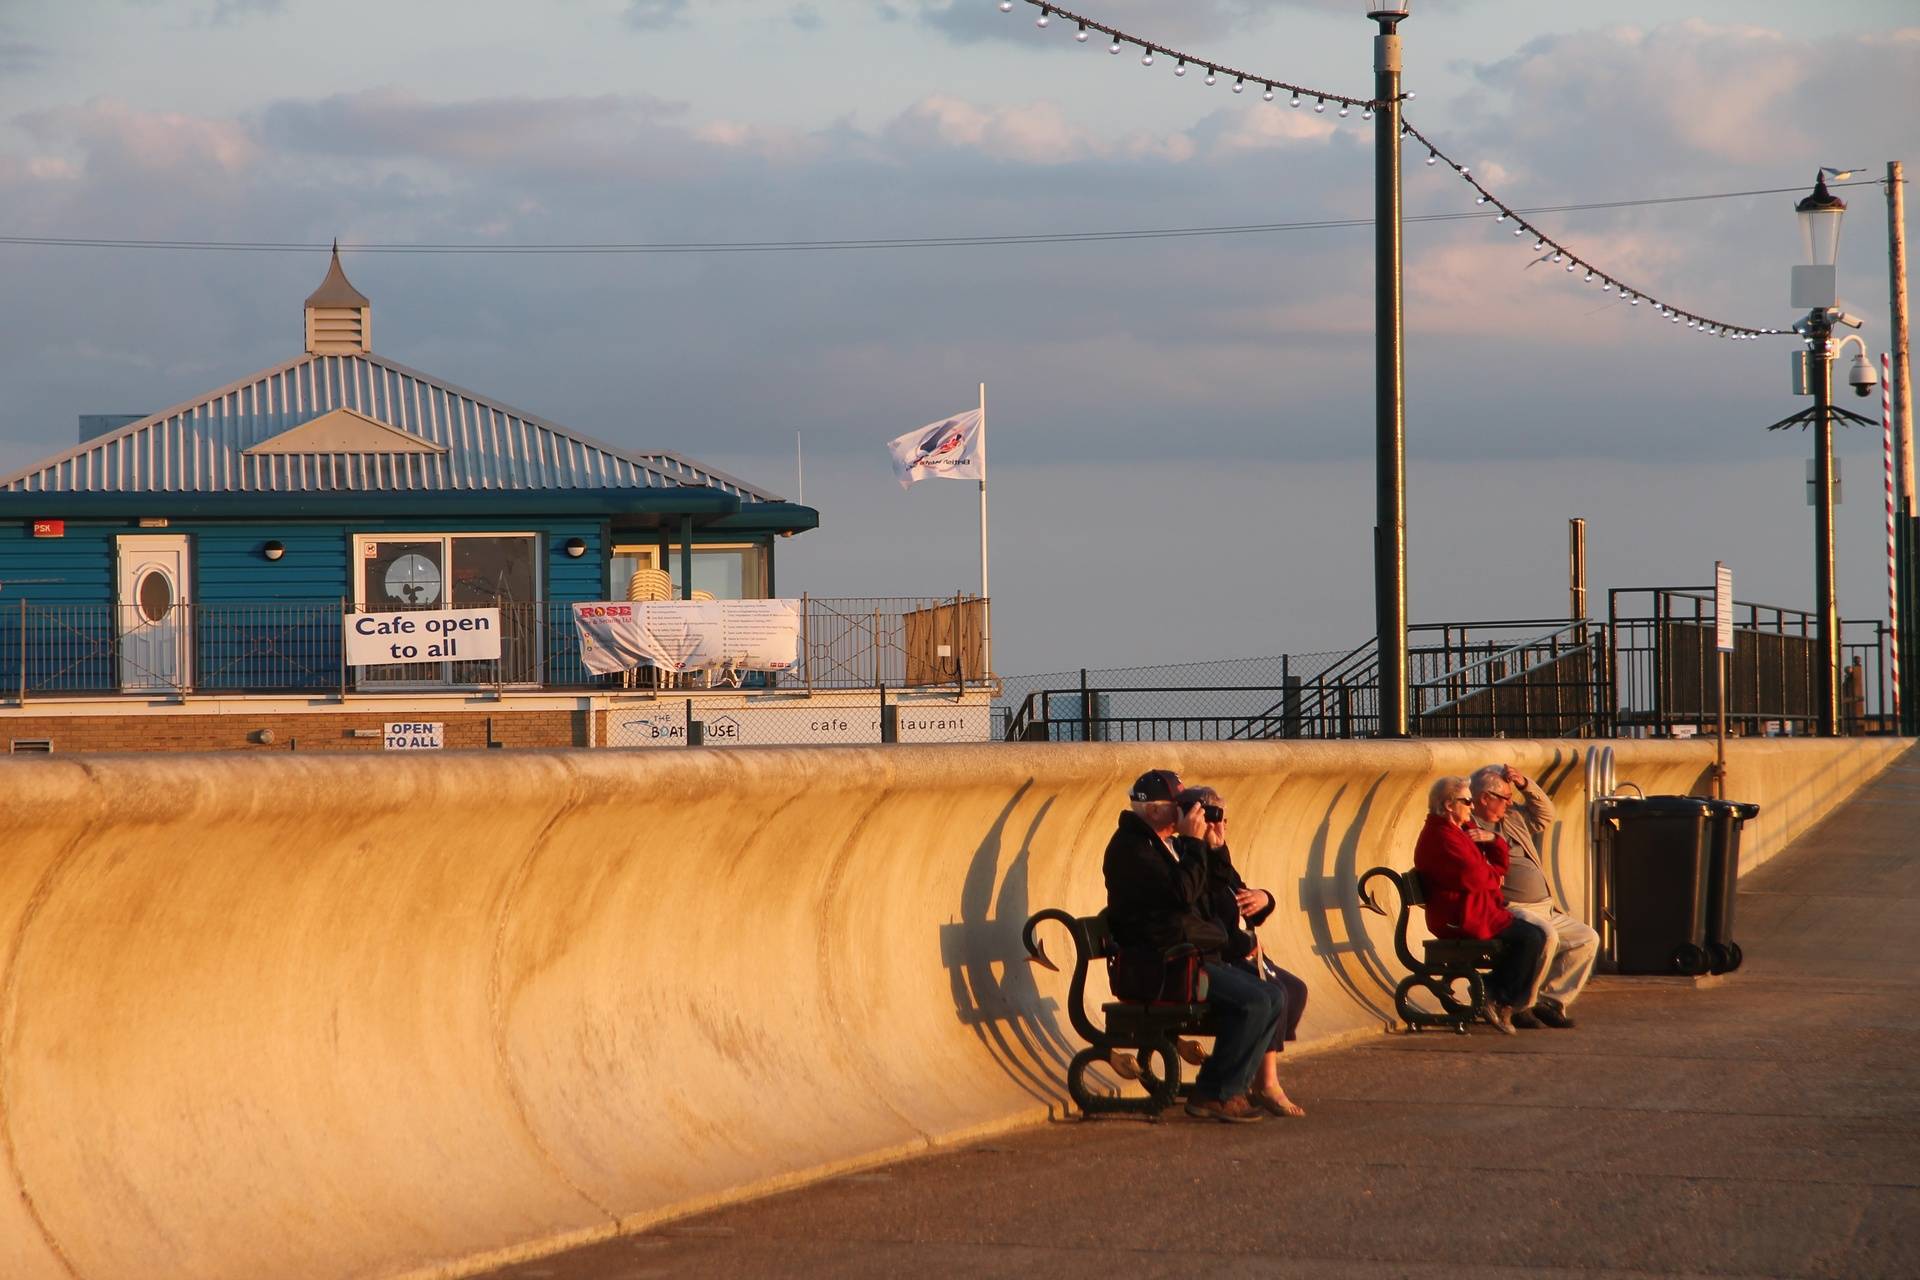 Enjoy the sunset on the prom